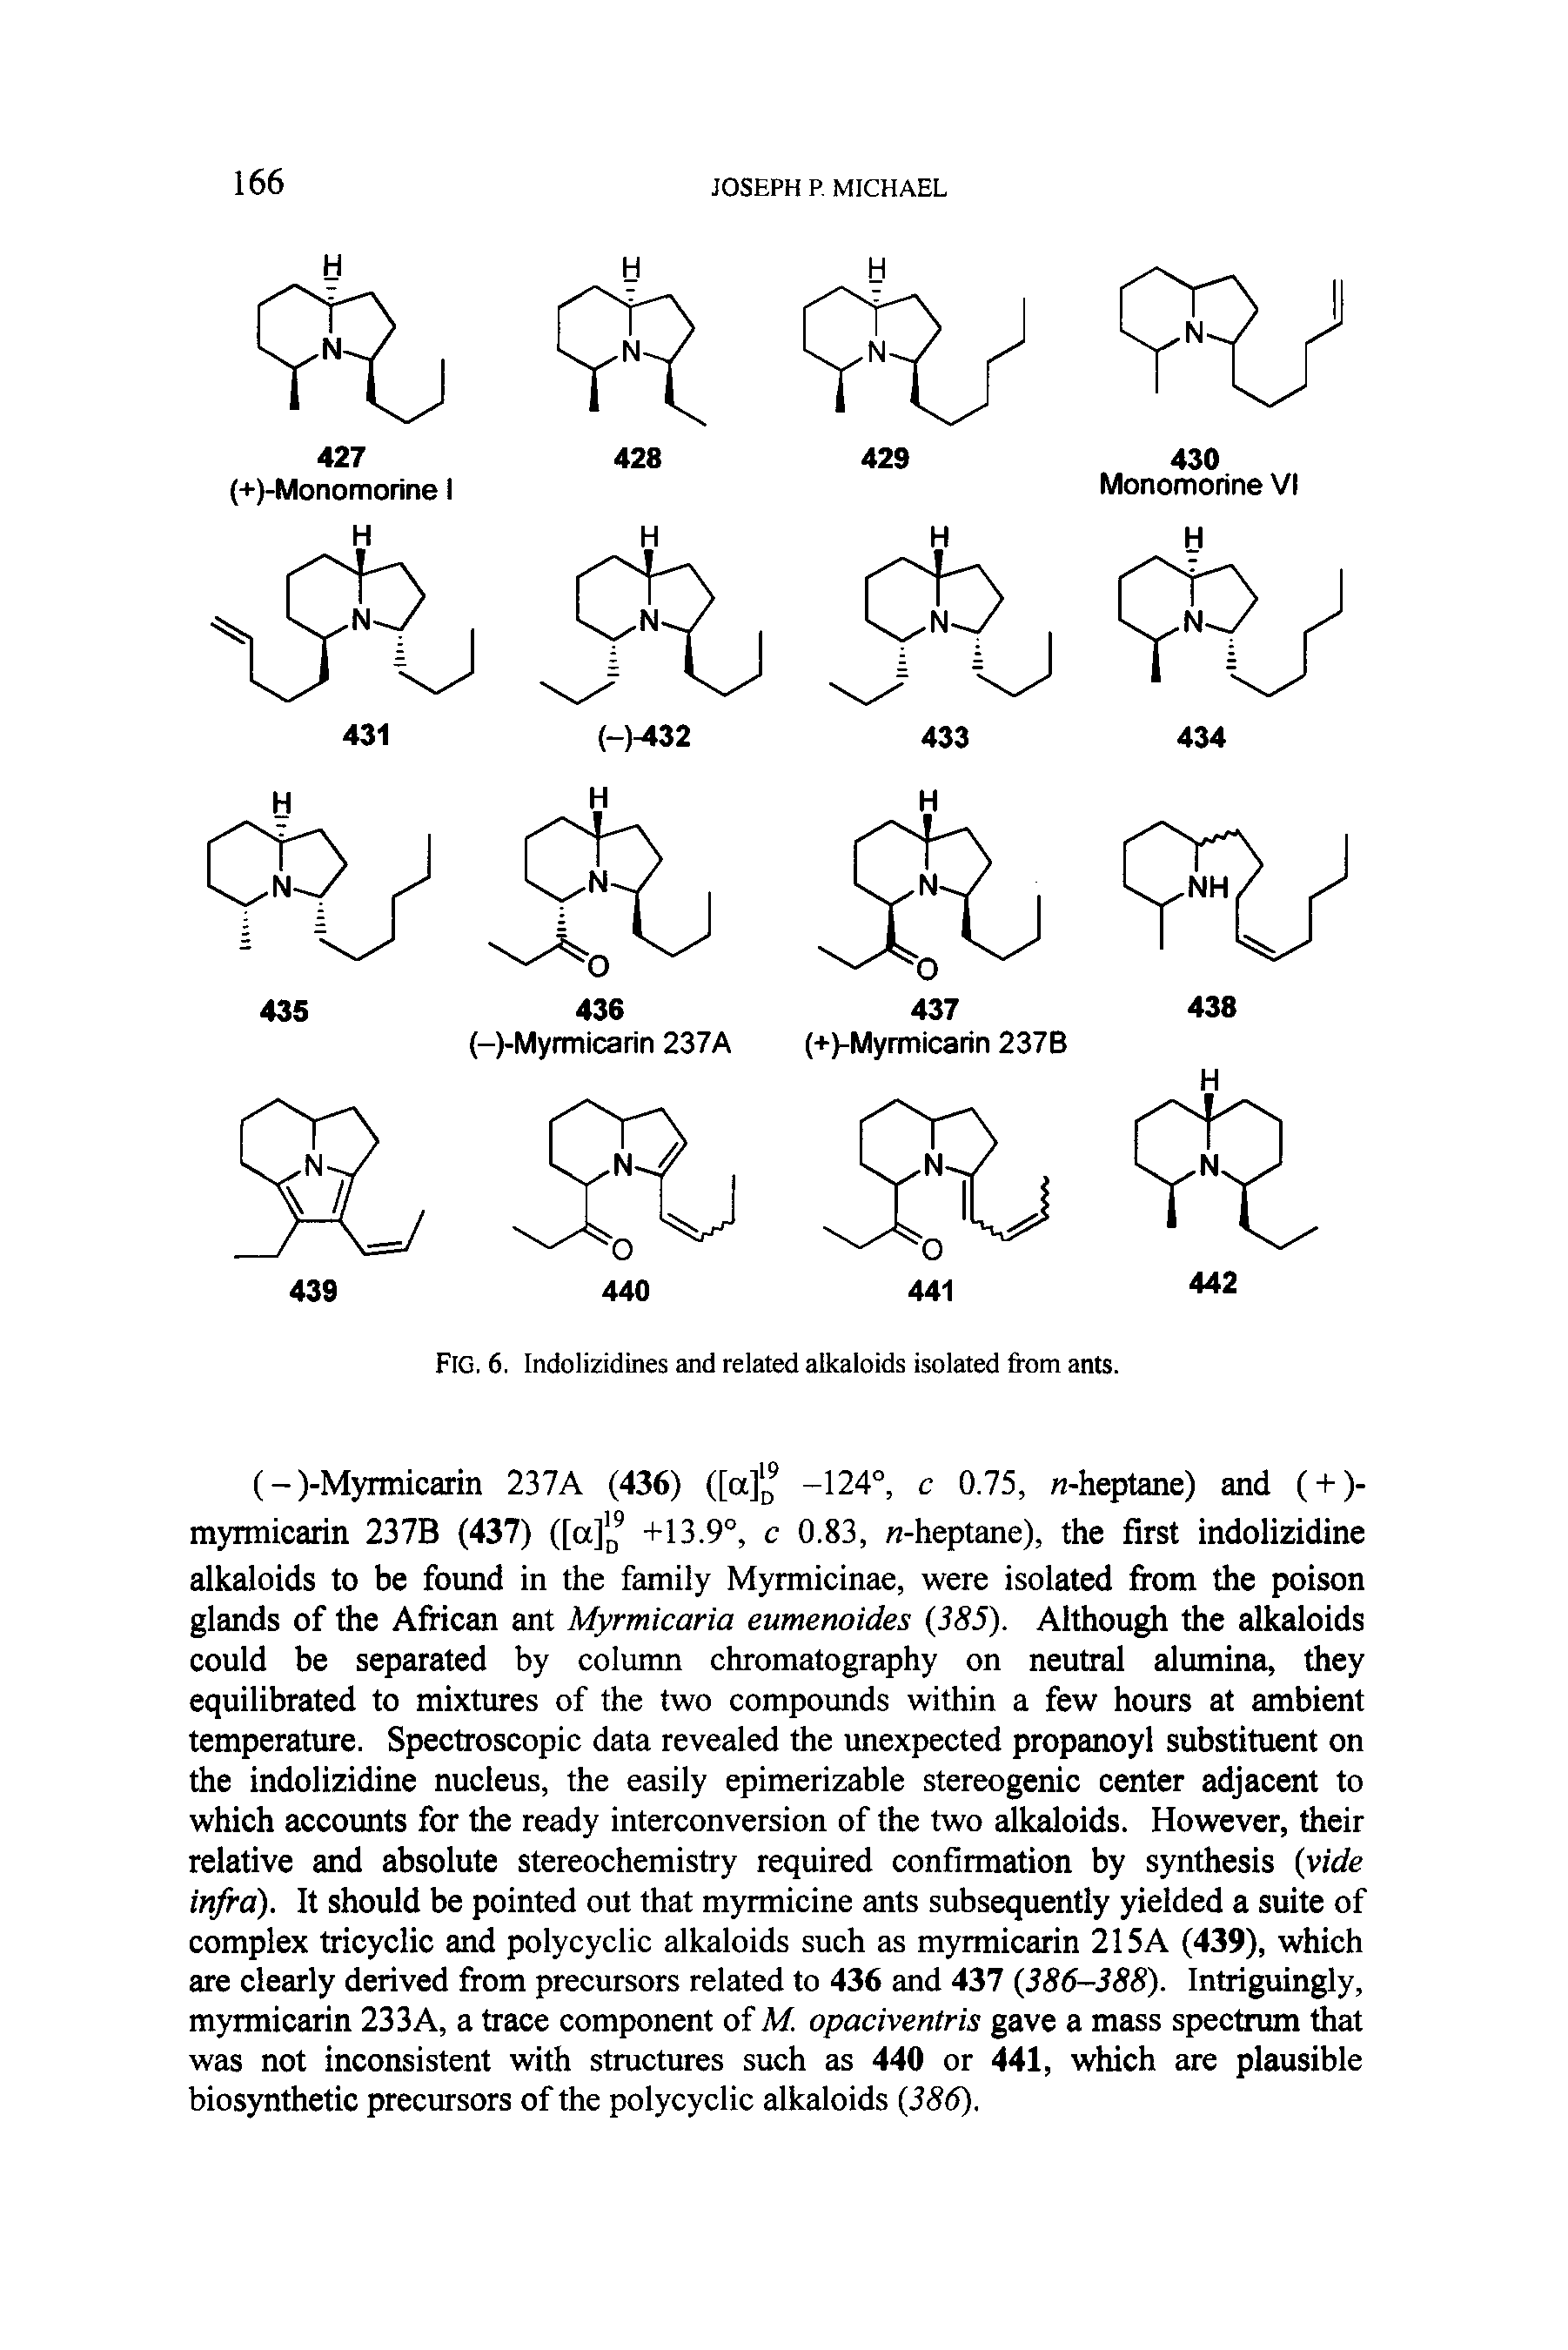 Fig. 6. Indolizidines and related alkaloids isolated from ants.